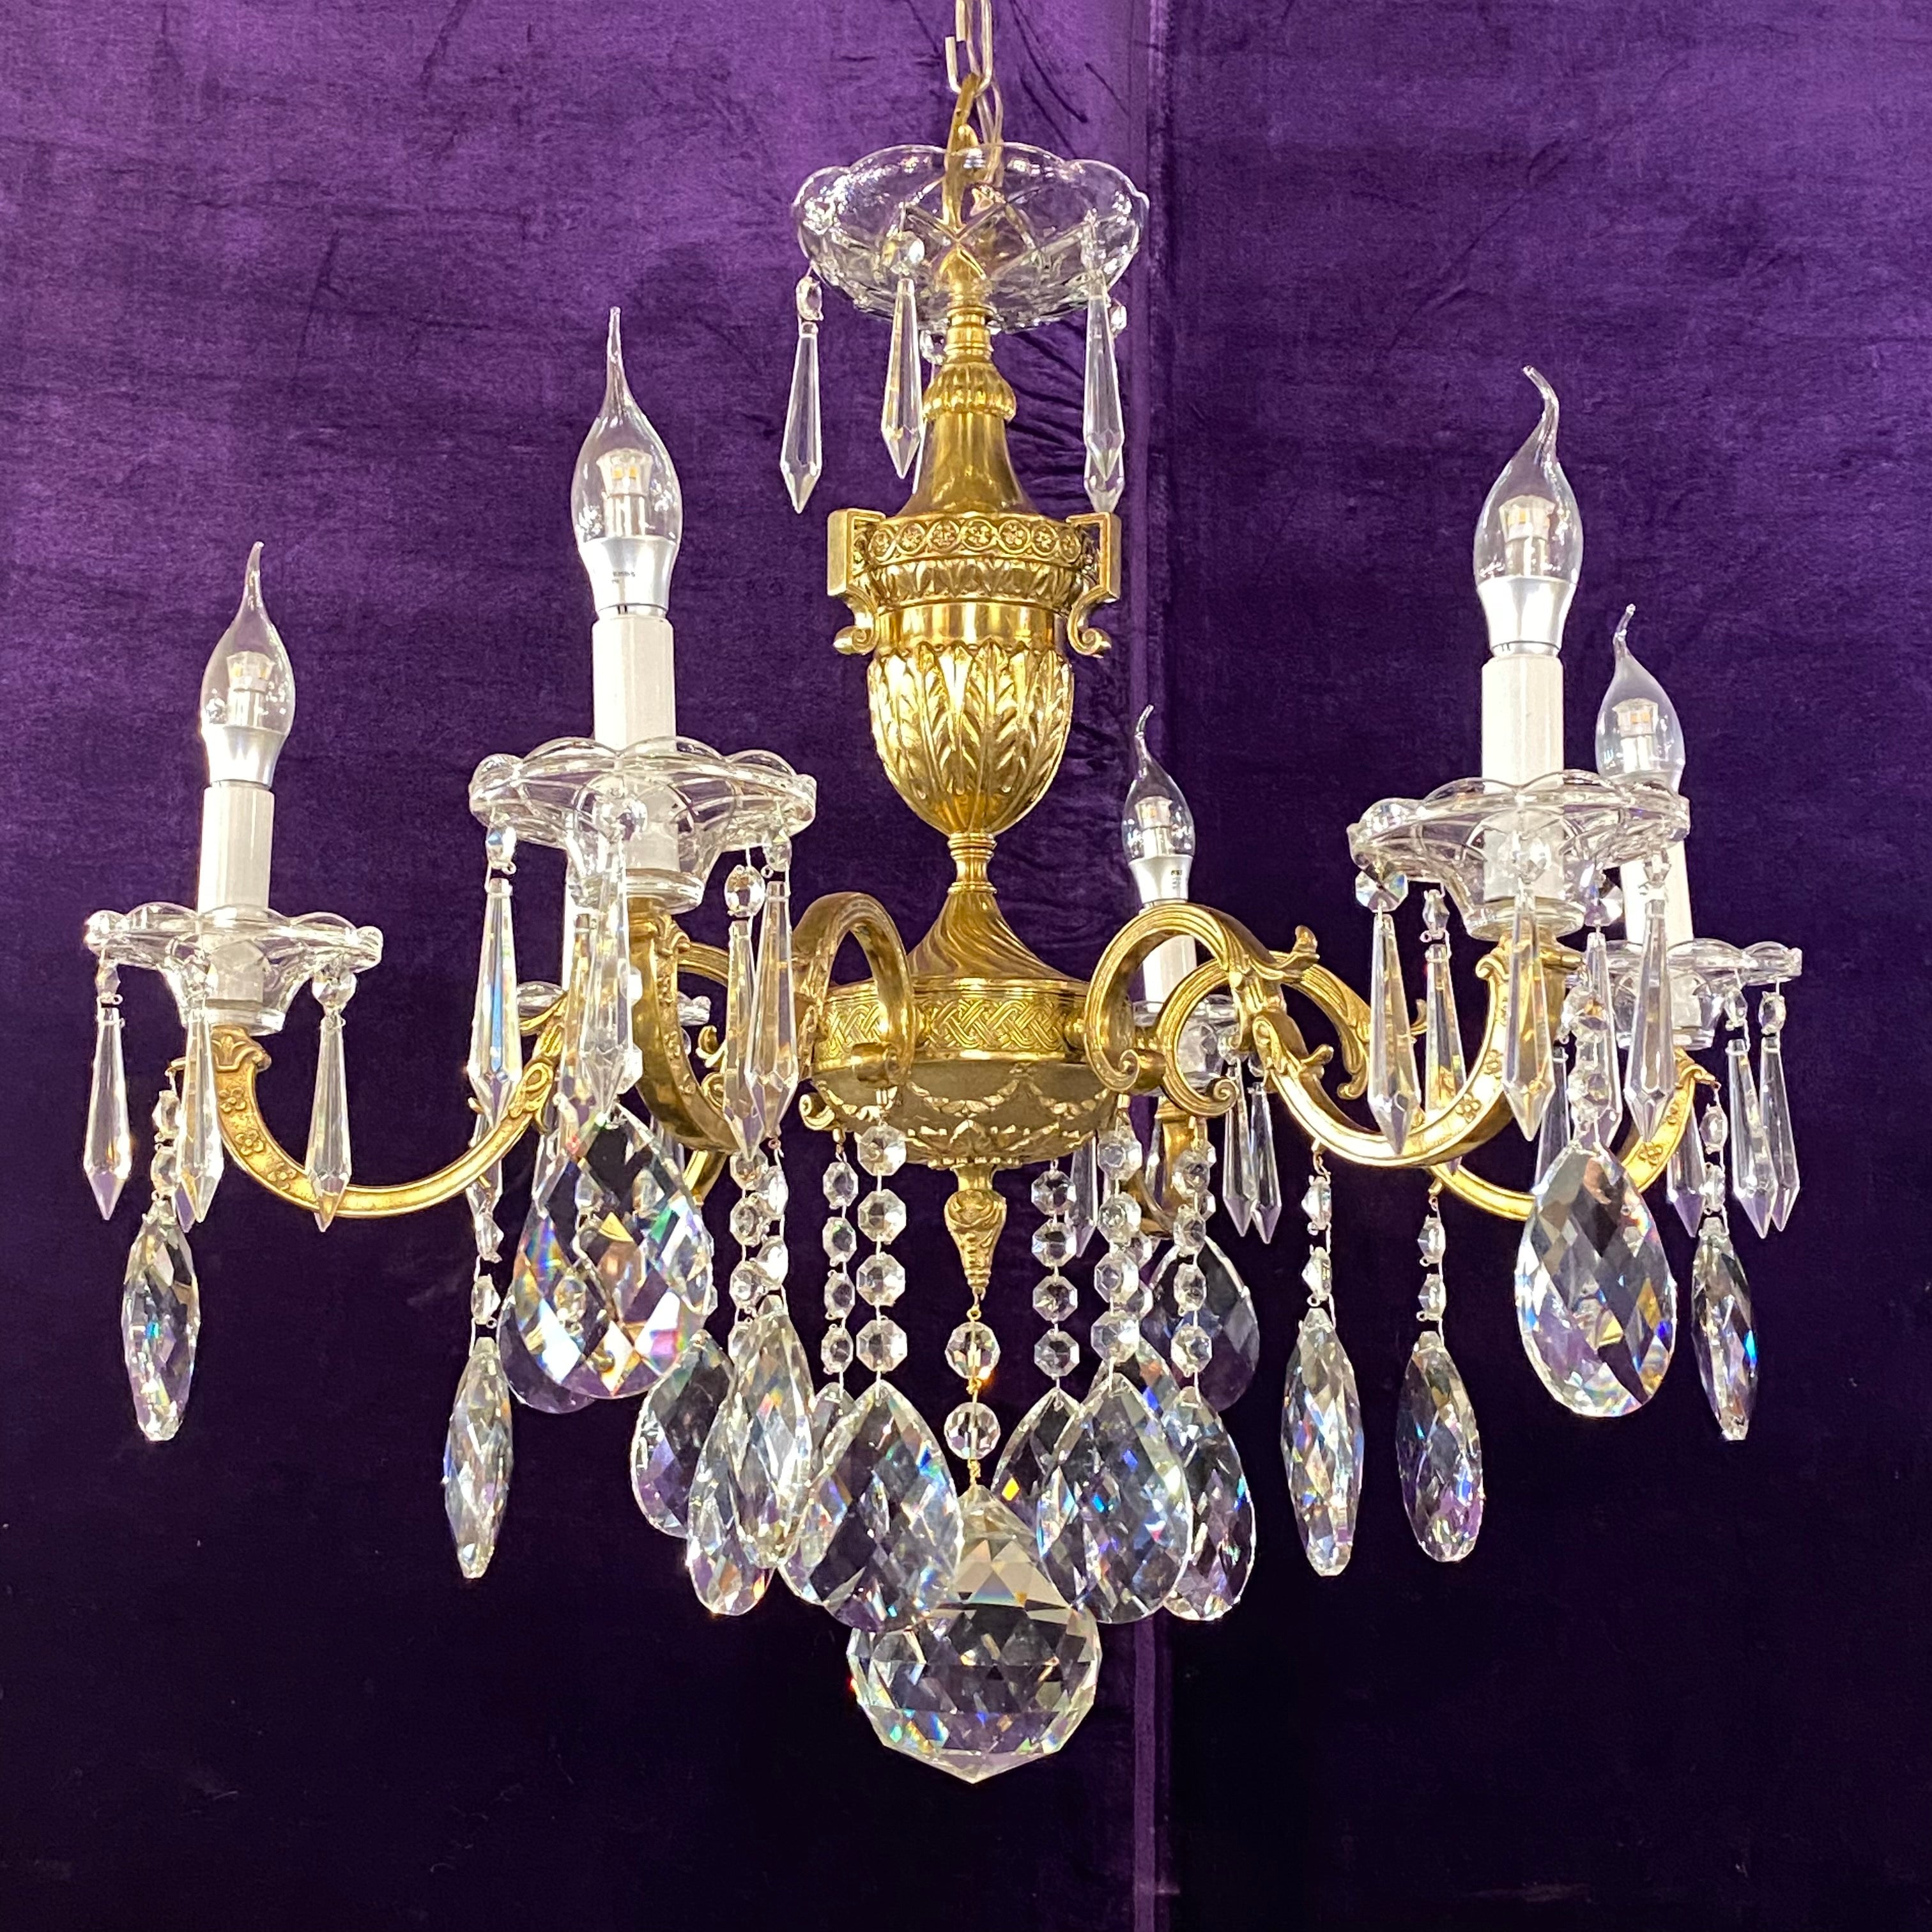 Antique Polished Brass Chandelier with Empire Style Details – Delos Antiques